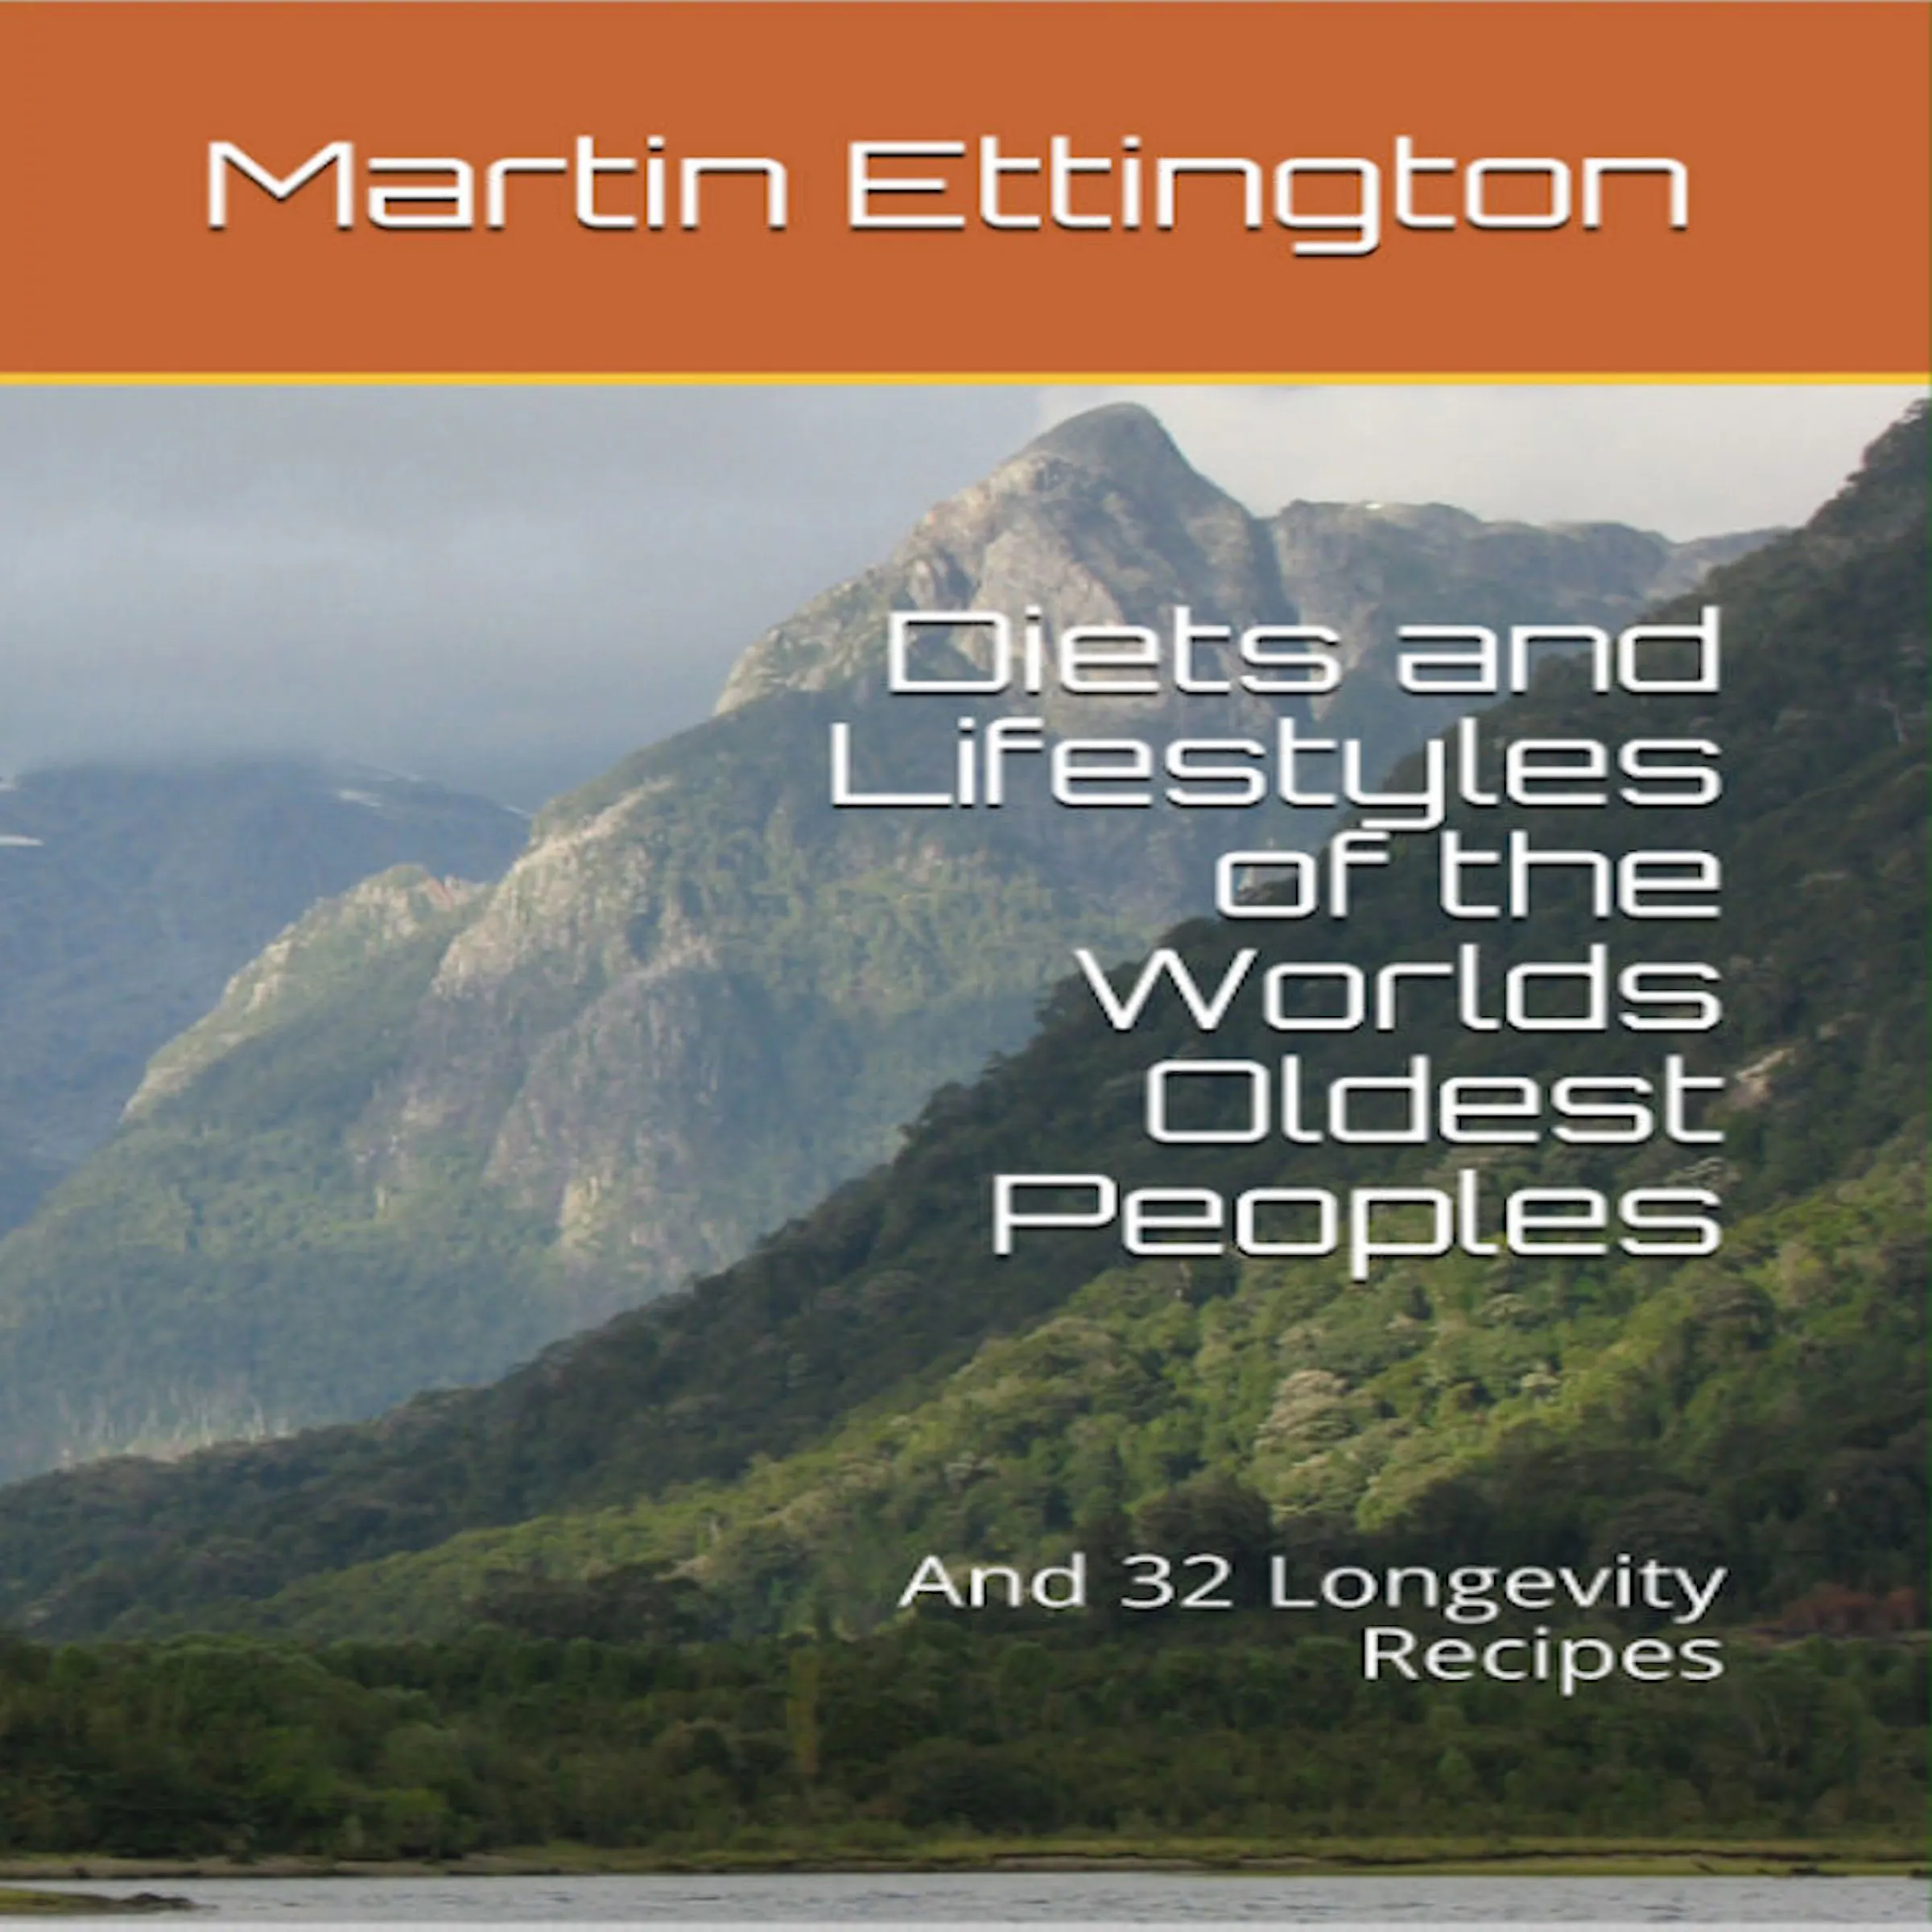 Diets and Lifestyles of the World's Oldest Peoples & 32 Longevity Recipes by Martin K. Ettington